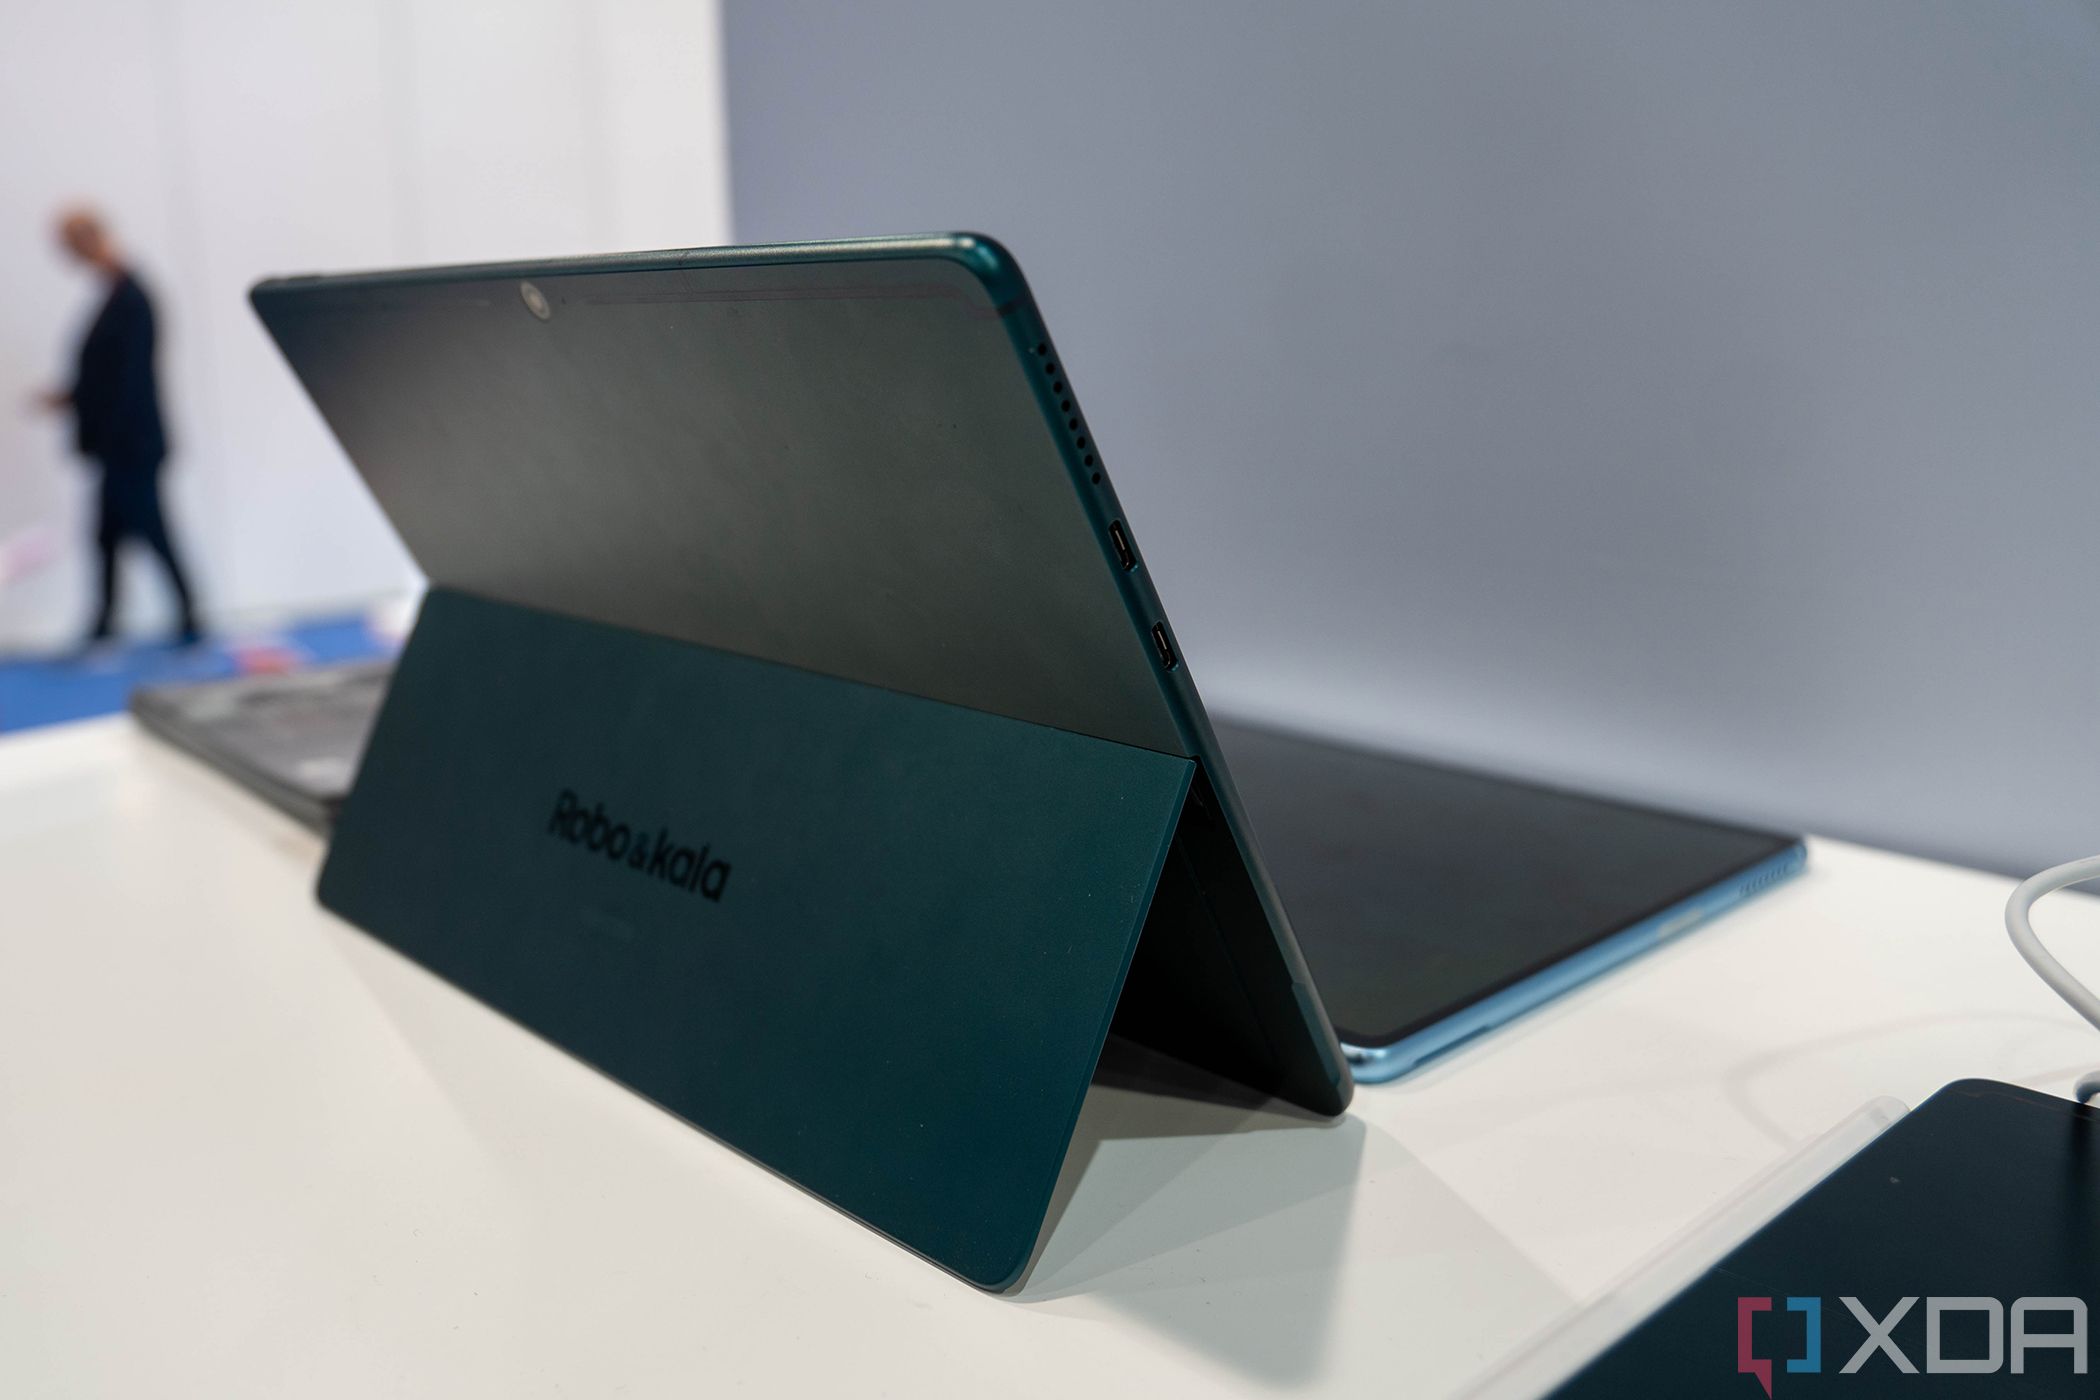 Angled view of tablet with kickstand